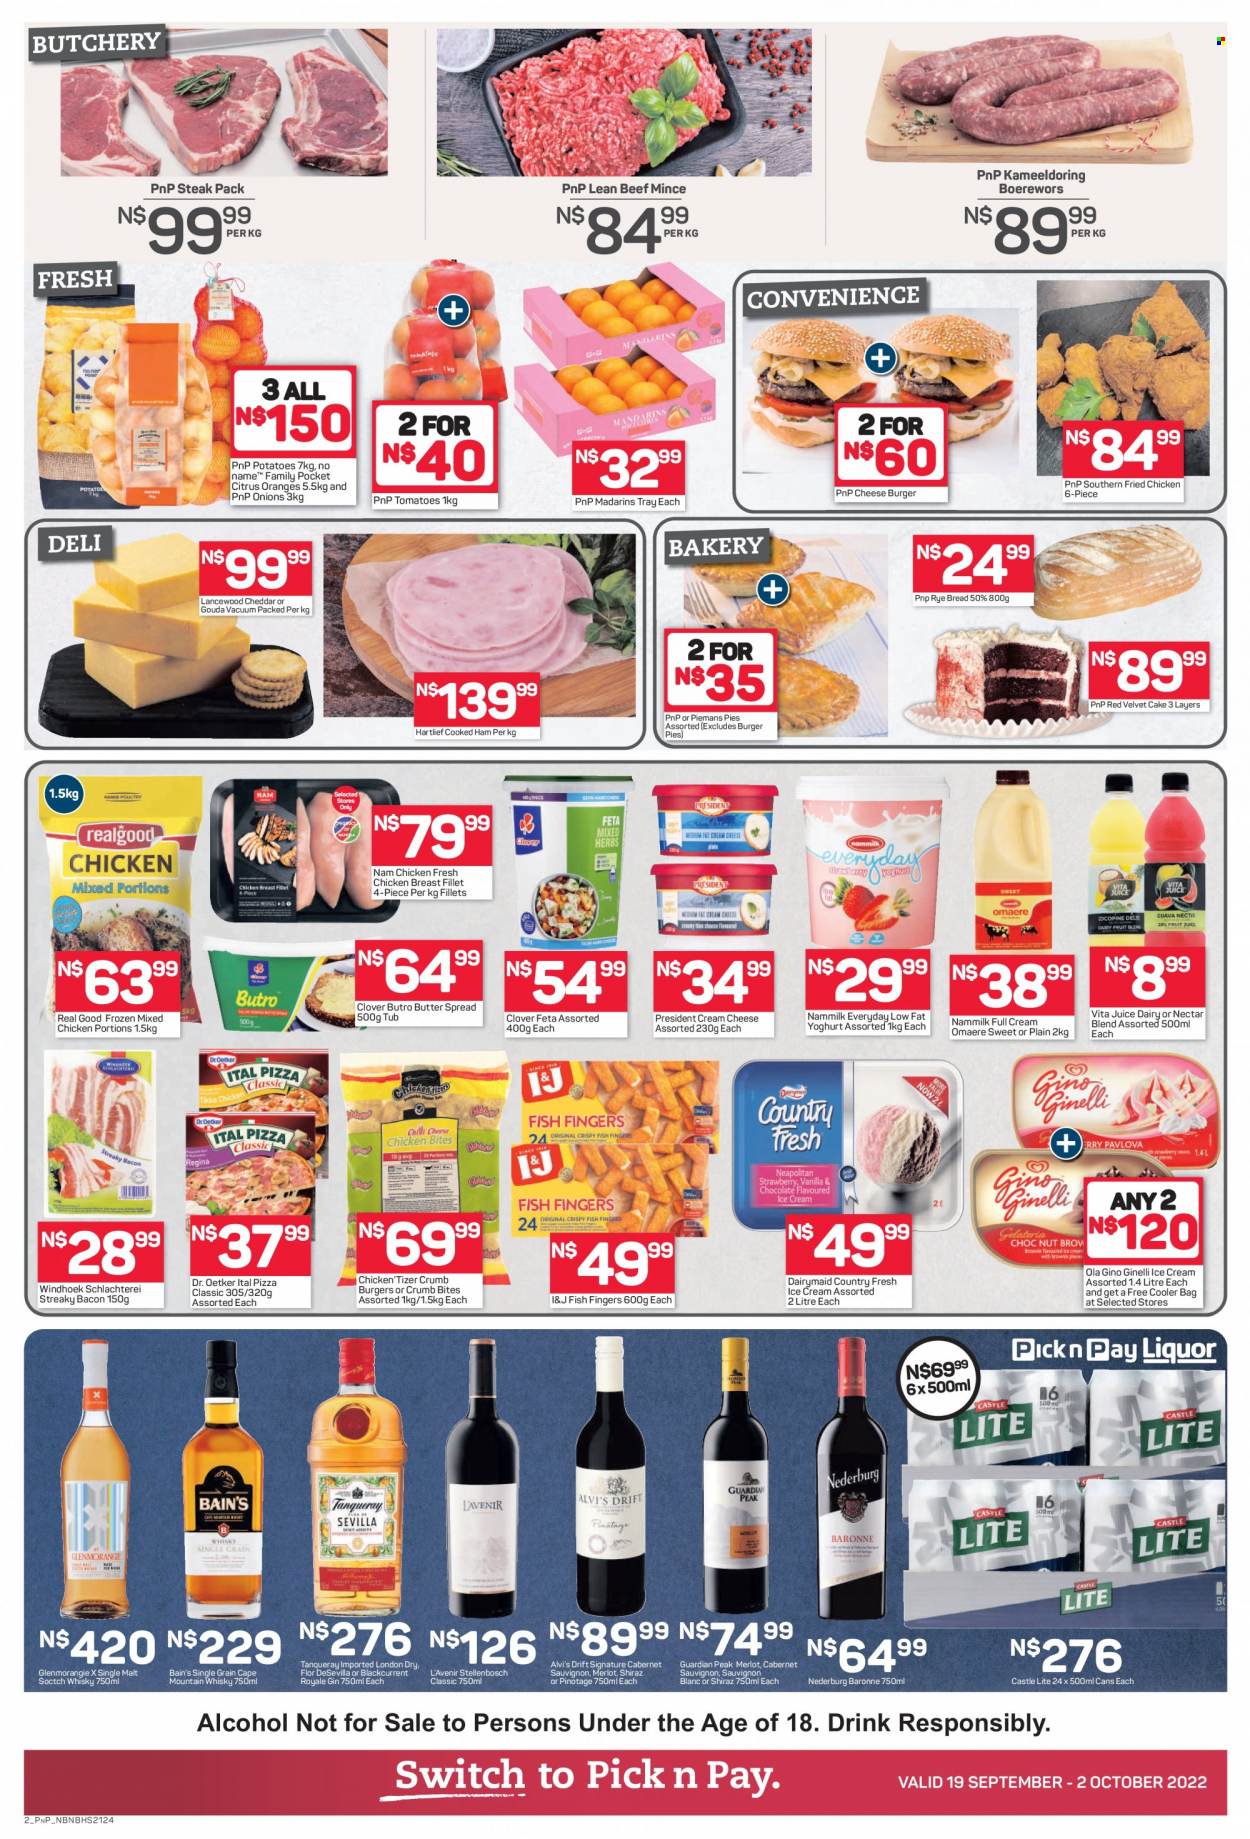 thumbnail - Pick n Pay catalogue  - 19/09/2022 - 02/10/2022 - Sales products - bread, cake, potatoes, onion, oranges, fish, fish fingers, fish sticks, pizza, hamburger, fried chicken, bacon, cooked ham, ham, streaky bacon, cream cheese, gouda, cheddar, Dr. Oetker, Lancewood, Président, feta, yoghurt, Clover, butter, ice cream, Gino Ginelli, Ola, Ital Pizza, switch, juice, Cabernet Sauvignon, red wine, white wine, Merlot, Nederburg, alcohol, Shiraz, Sauvignon Blanc, gin, whisky, Castle, chicken breasts, beef meat, ground beef, steak, braai wors. Page 3.